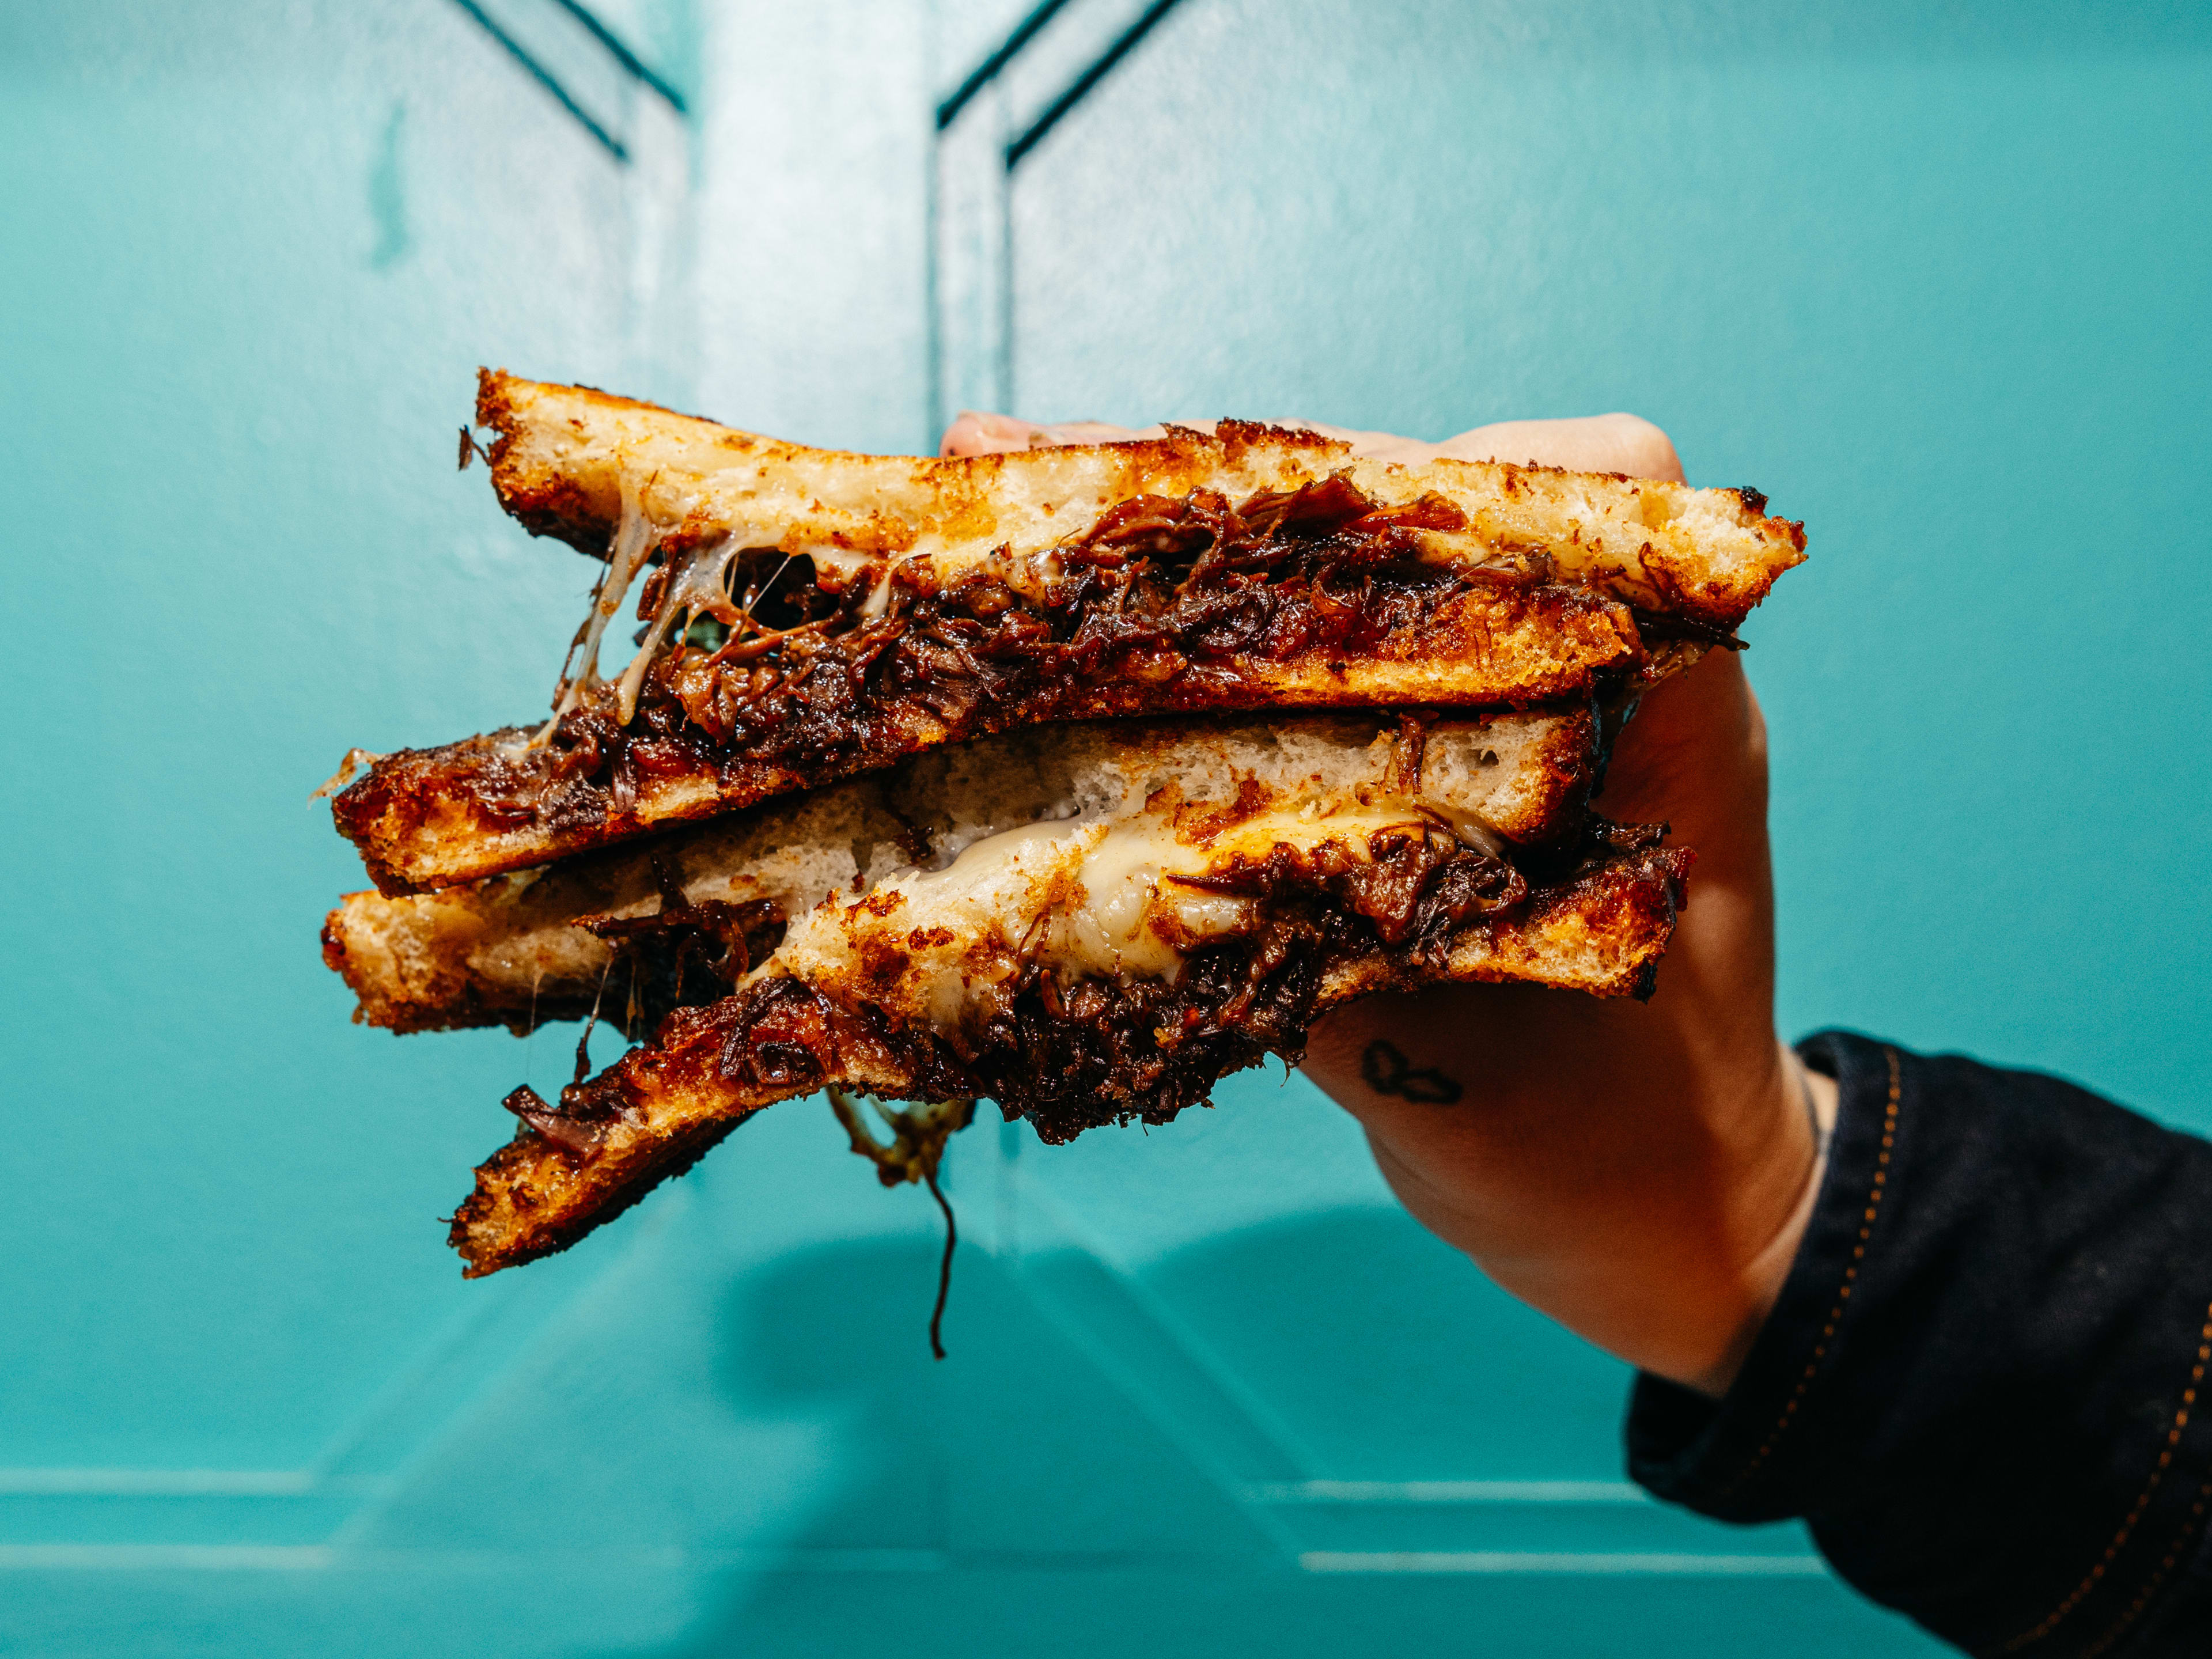 A hand holding an oxtail grilled cheese sandwich.